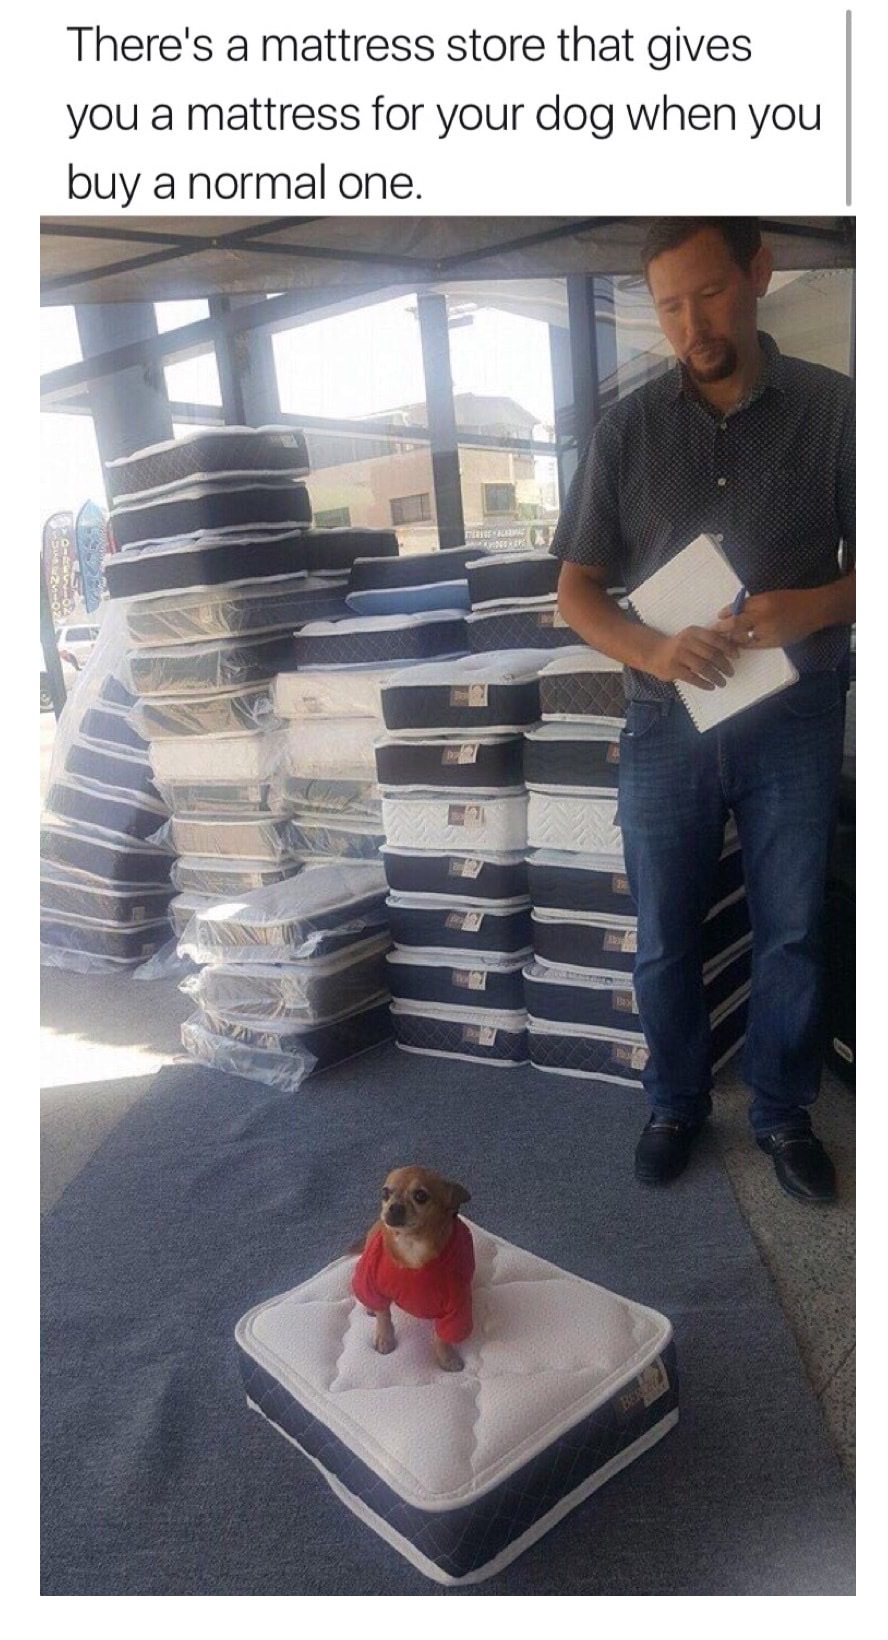 mattress for dog - There's a mattress store that gives you a mattress for your dog when you buy a normal one.